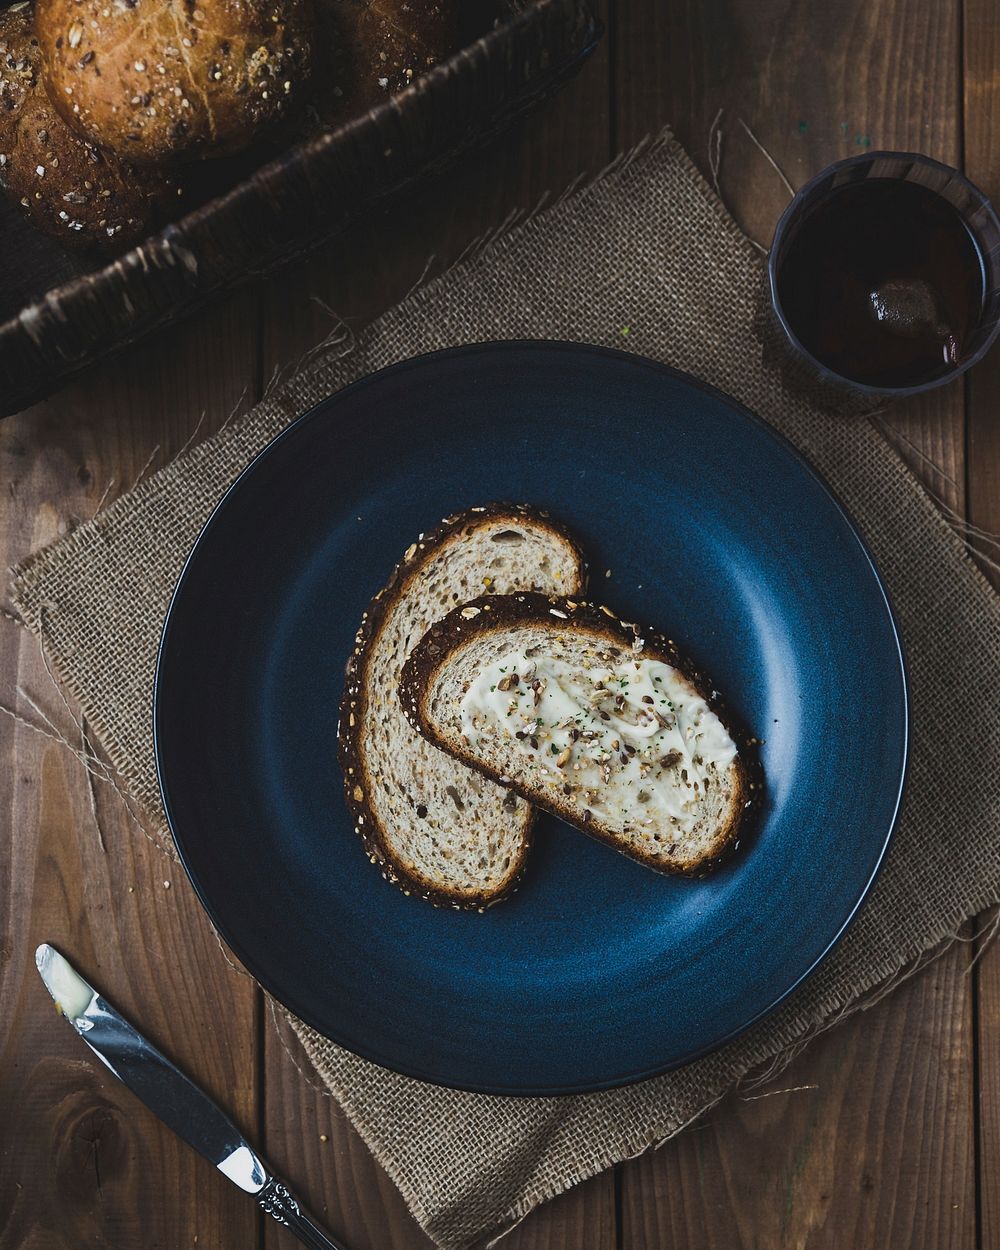 Free slice bread with seeds and butter image, public domain food CC0 photo.